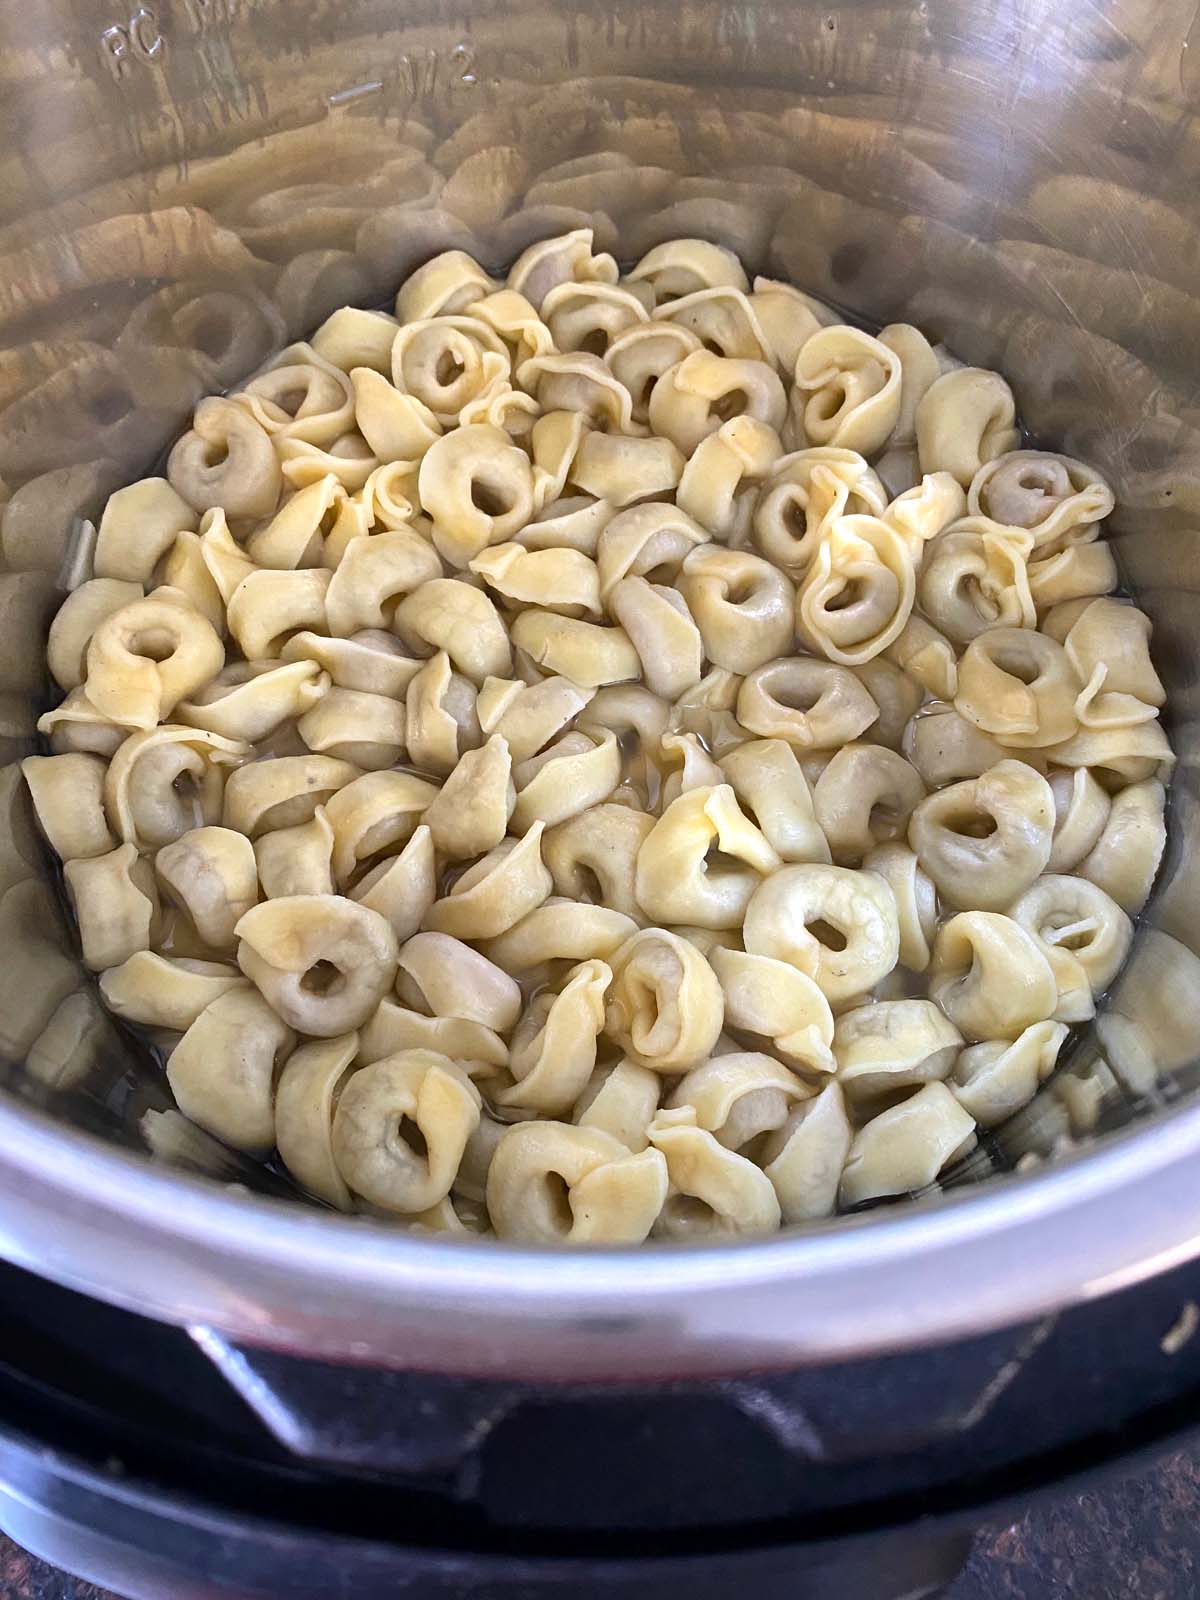 Plain cooked tortellini in an instant pot.